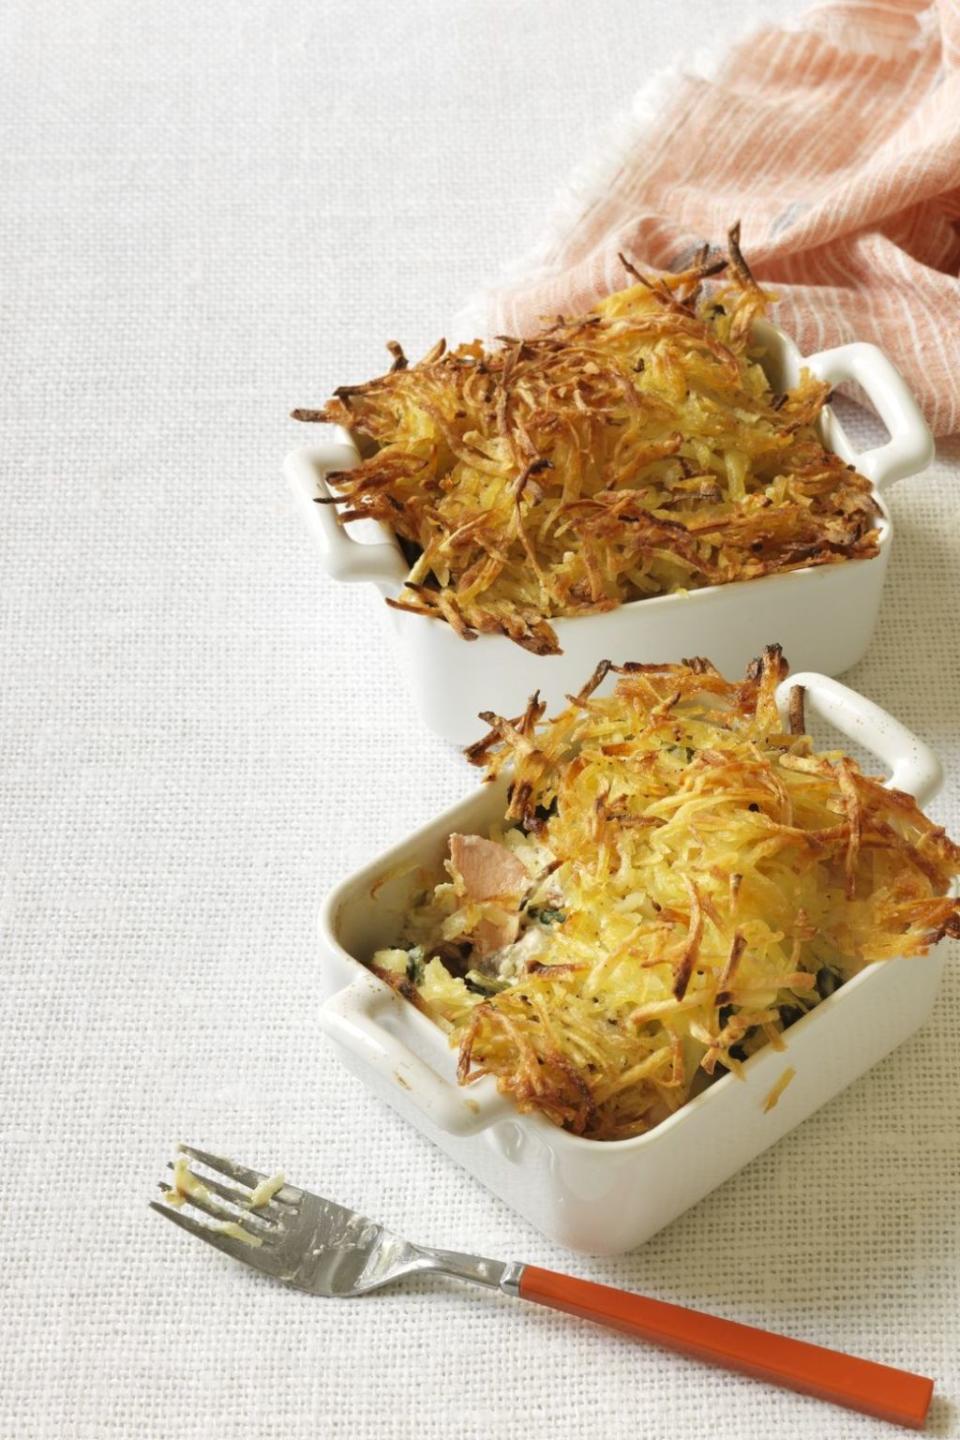 <p>Succulent fish and seafood become a decadent dinner when mixed into a creamy sauce topped with a crispy, shredded potato crust.</p><p><a rel="nofollow noopener" href="http://www.womansday.com/food-recipes/food-drinks/recipes/a12460/seafood-bake-crispy-hash-brown-topping-recipe-wdy0314/" target="_blank" data-ylk="slk:Get the recipe." class="link "><strong>Get the recipe.</strong></a> </p>